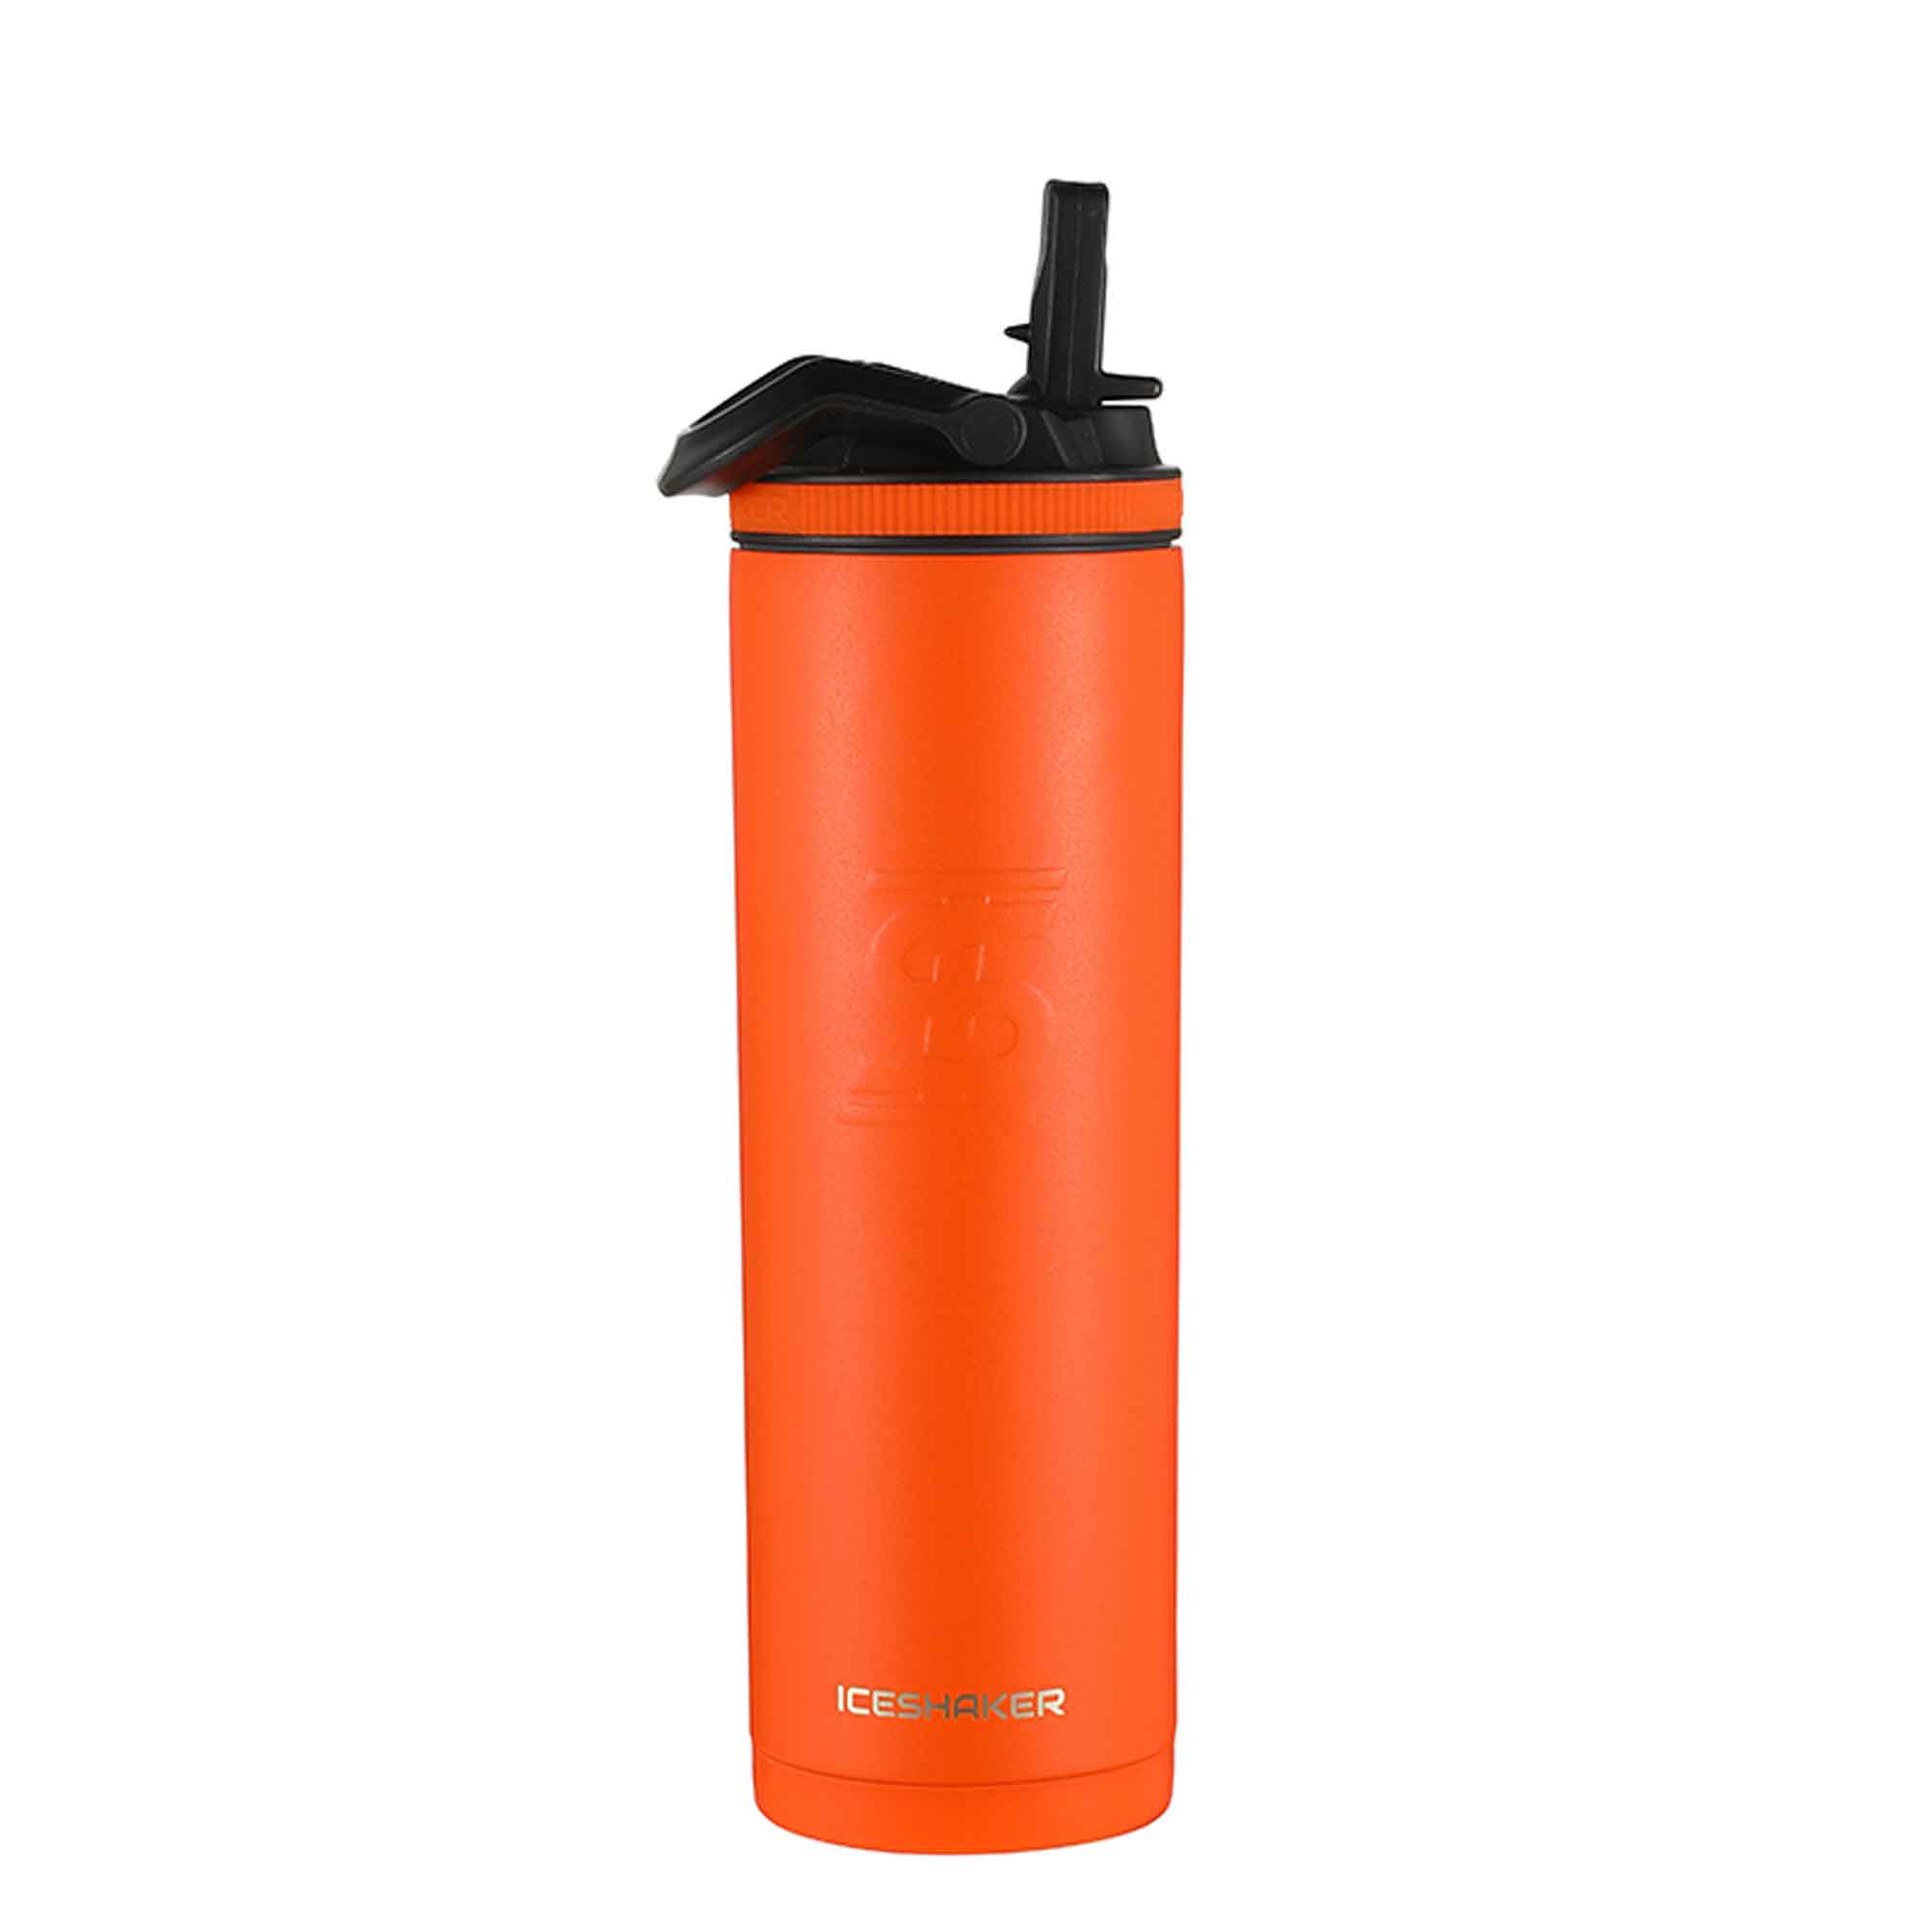 Actually I'm Slim German' Insulated Stainless Steel Water Bottle